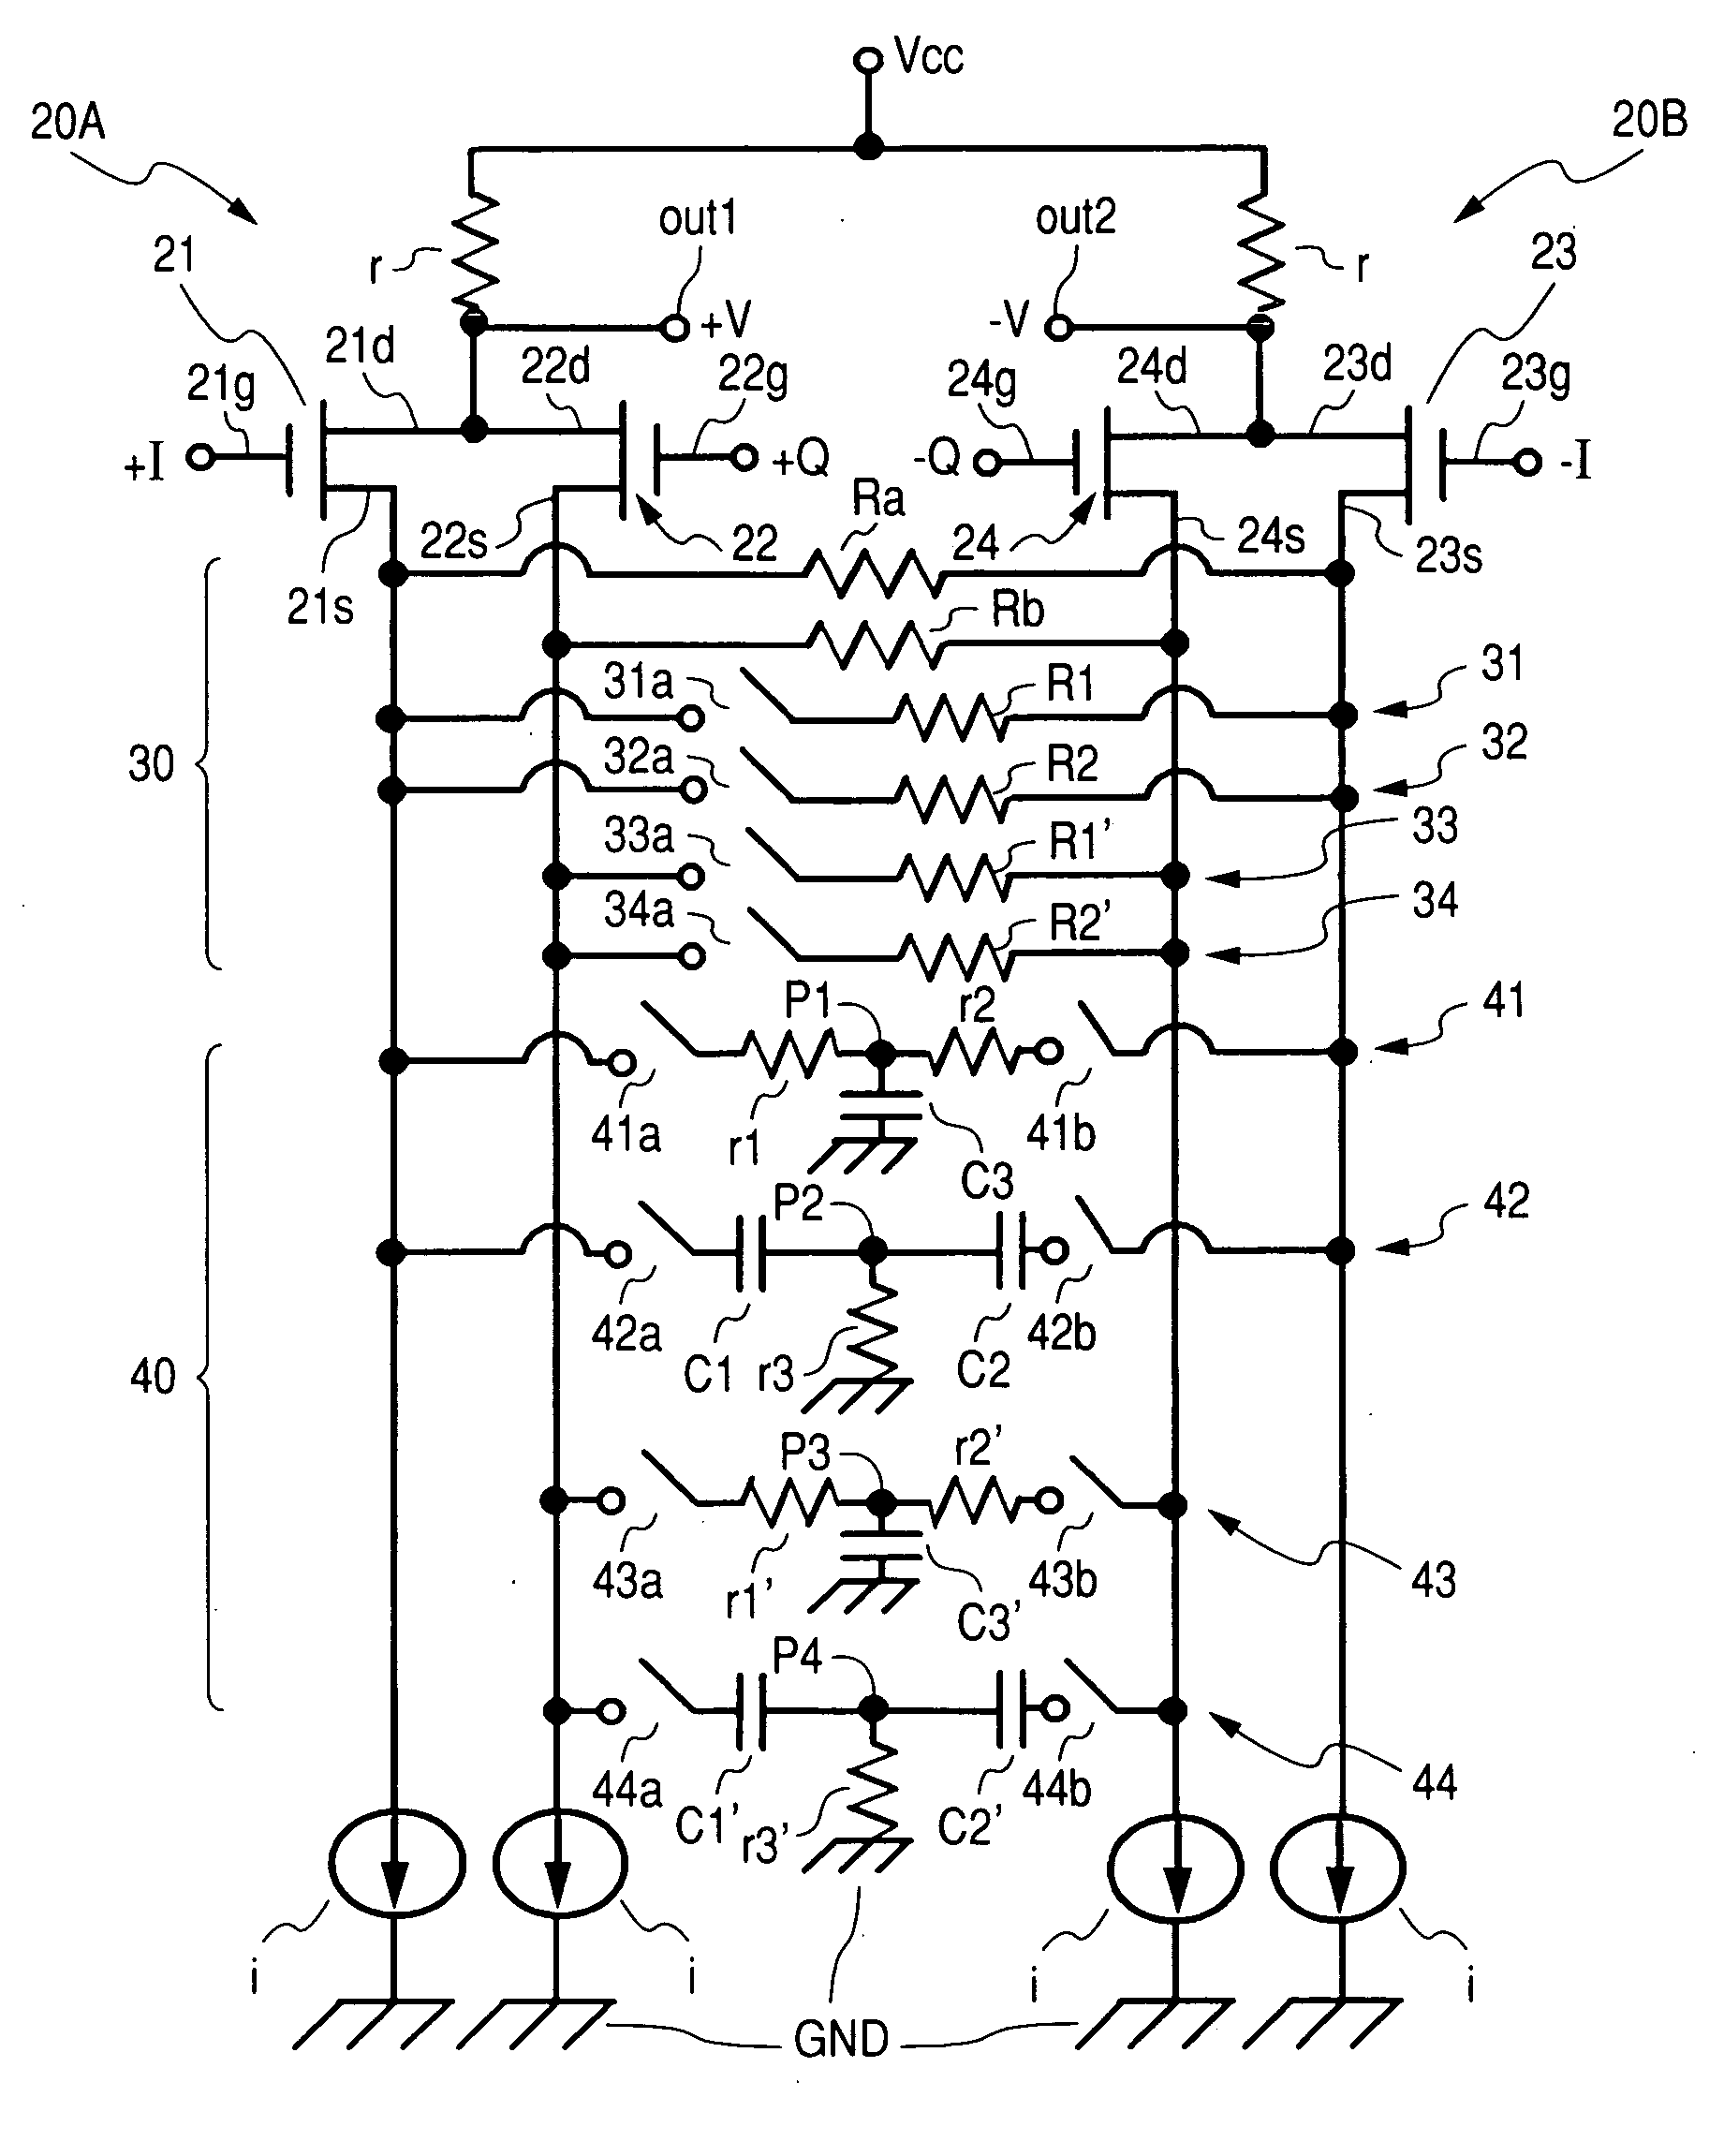 Signal adder circuit capable of removing effects due to phase error or amplitude error of I and Q signals